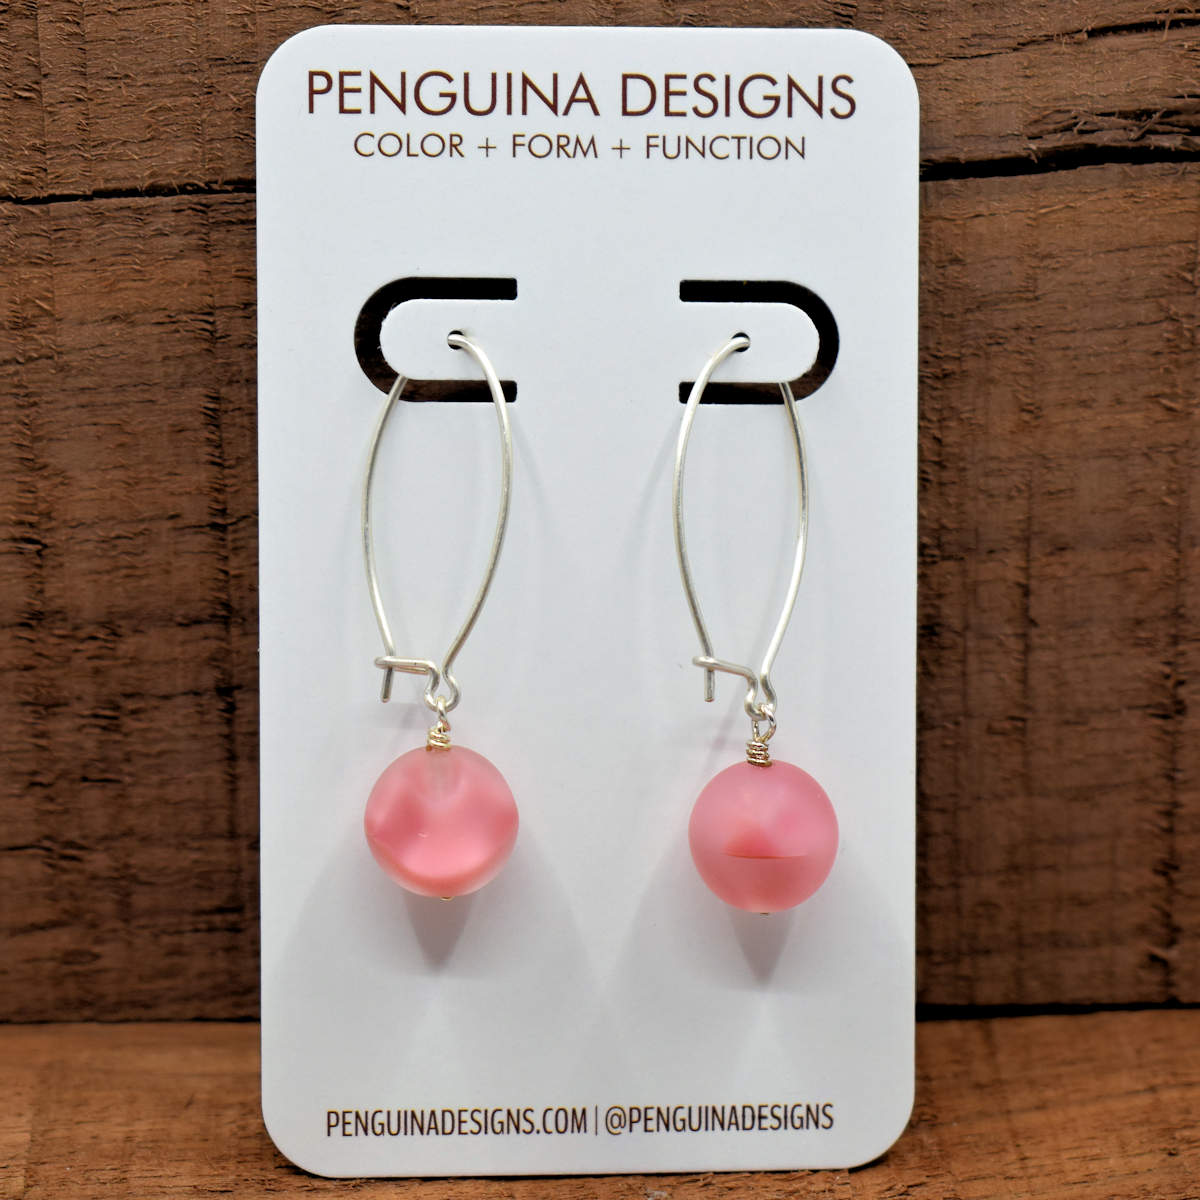 A pair of earrings on a white card rest against a wood background. The earrings have long silver oval wires that latch and frosted pink glass balls at the bottom.